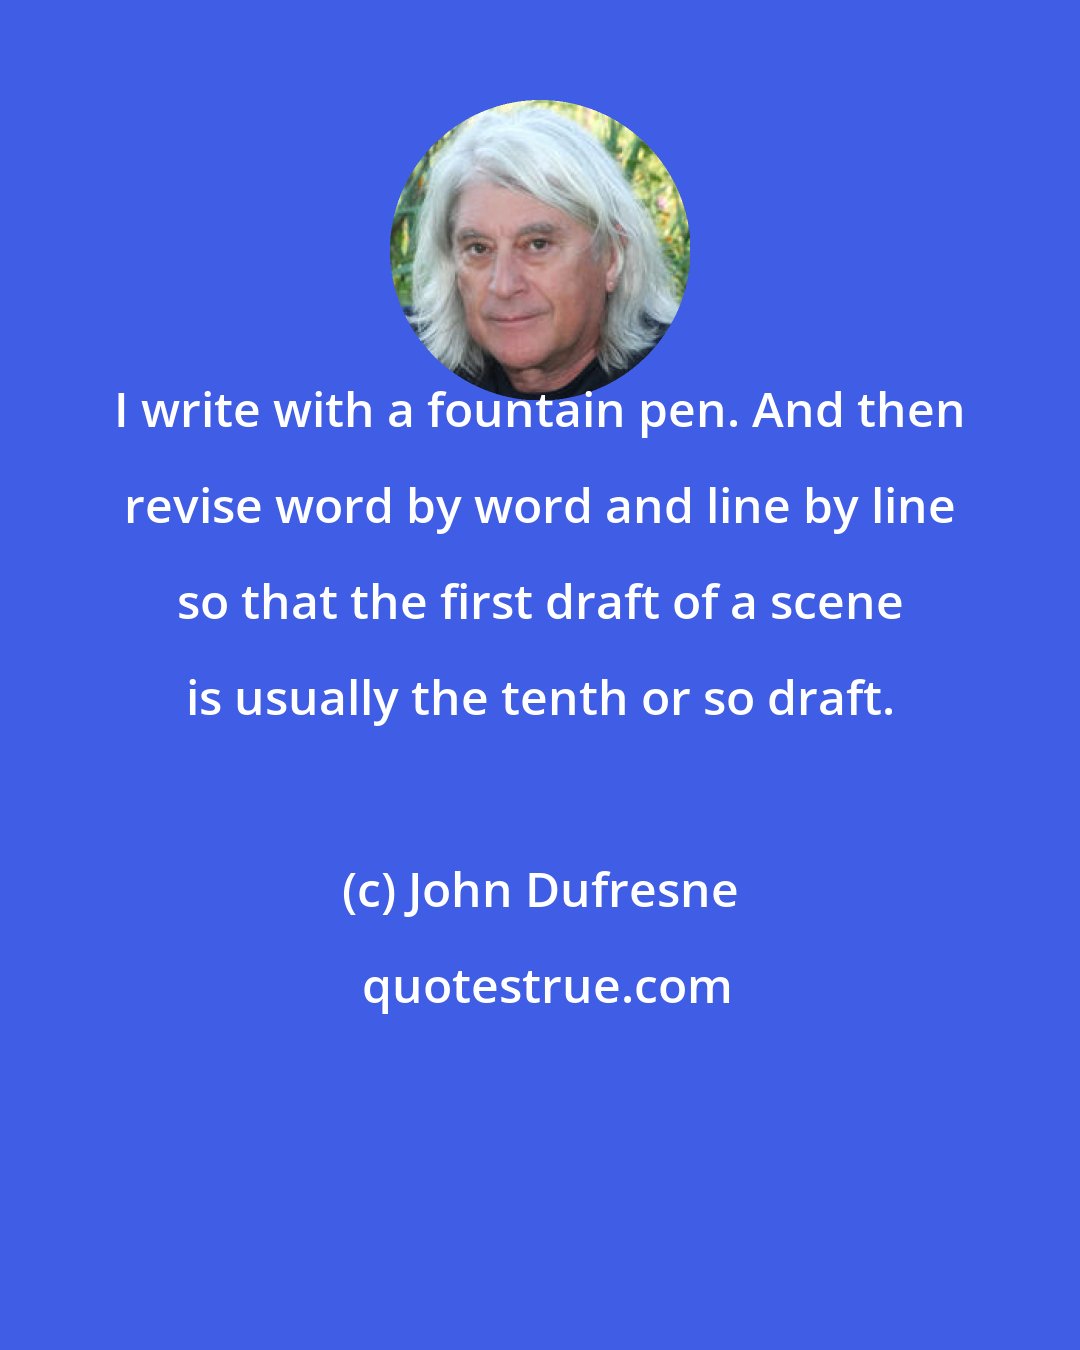 John Dufresne: I write with a fountain pen. And then revise word by word and line by line so that the first draft of a scene is usually the tenth or so draft.